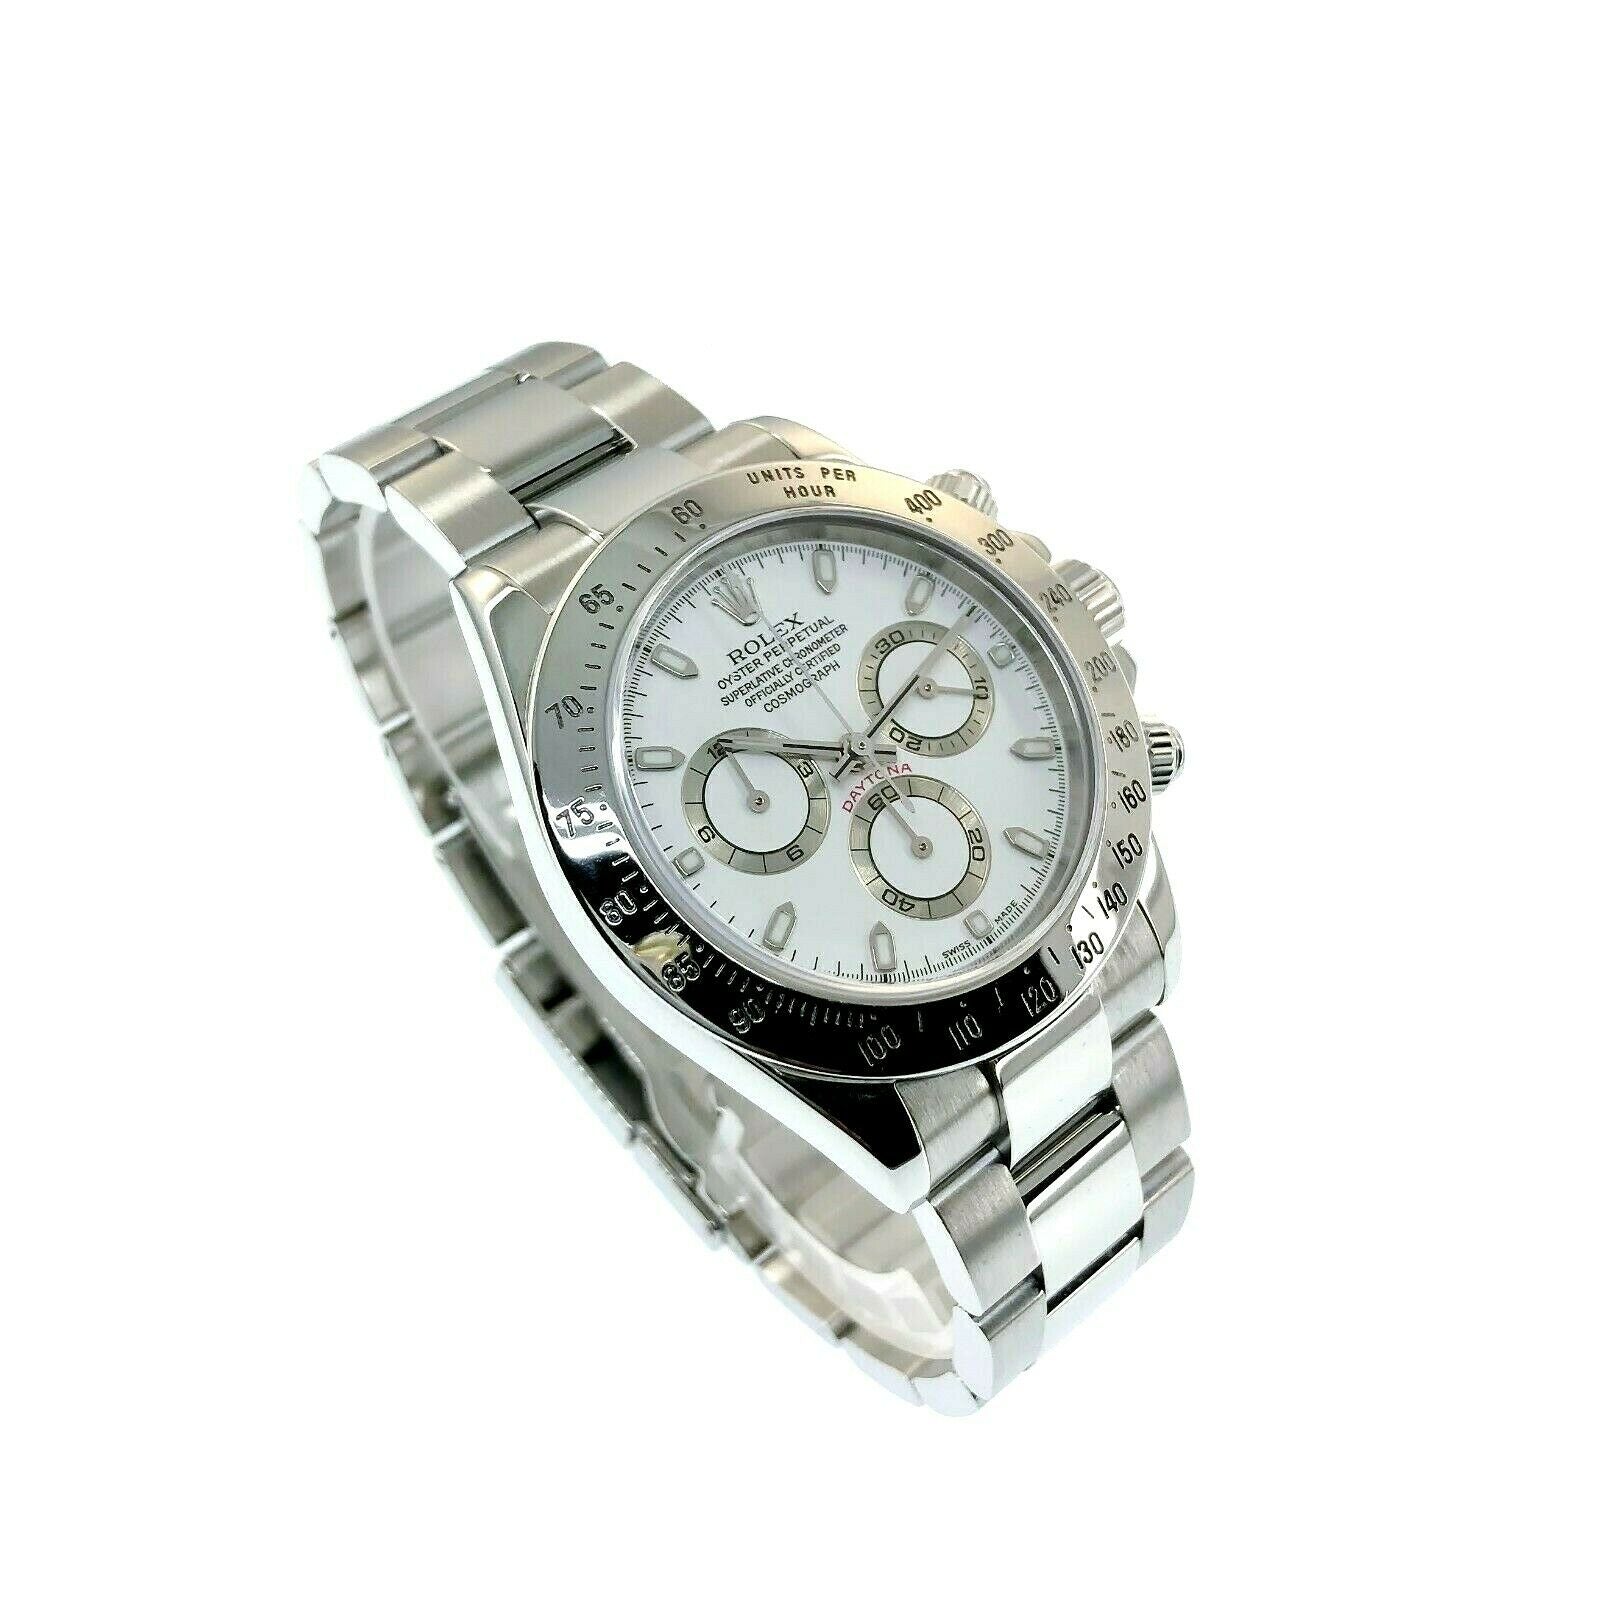 Rolex Cosmograph Daytona 40mm Stainless Steel White Dial 116520 Box & Papers